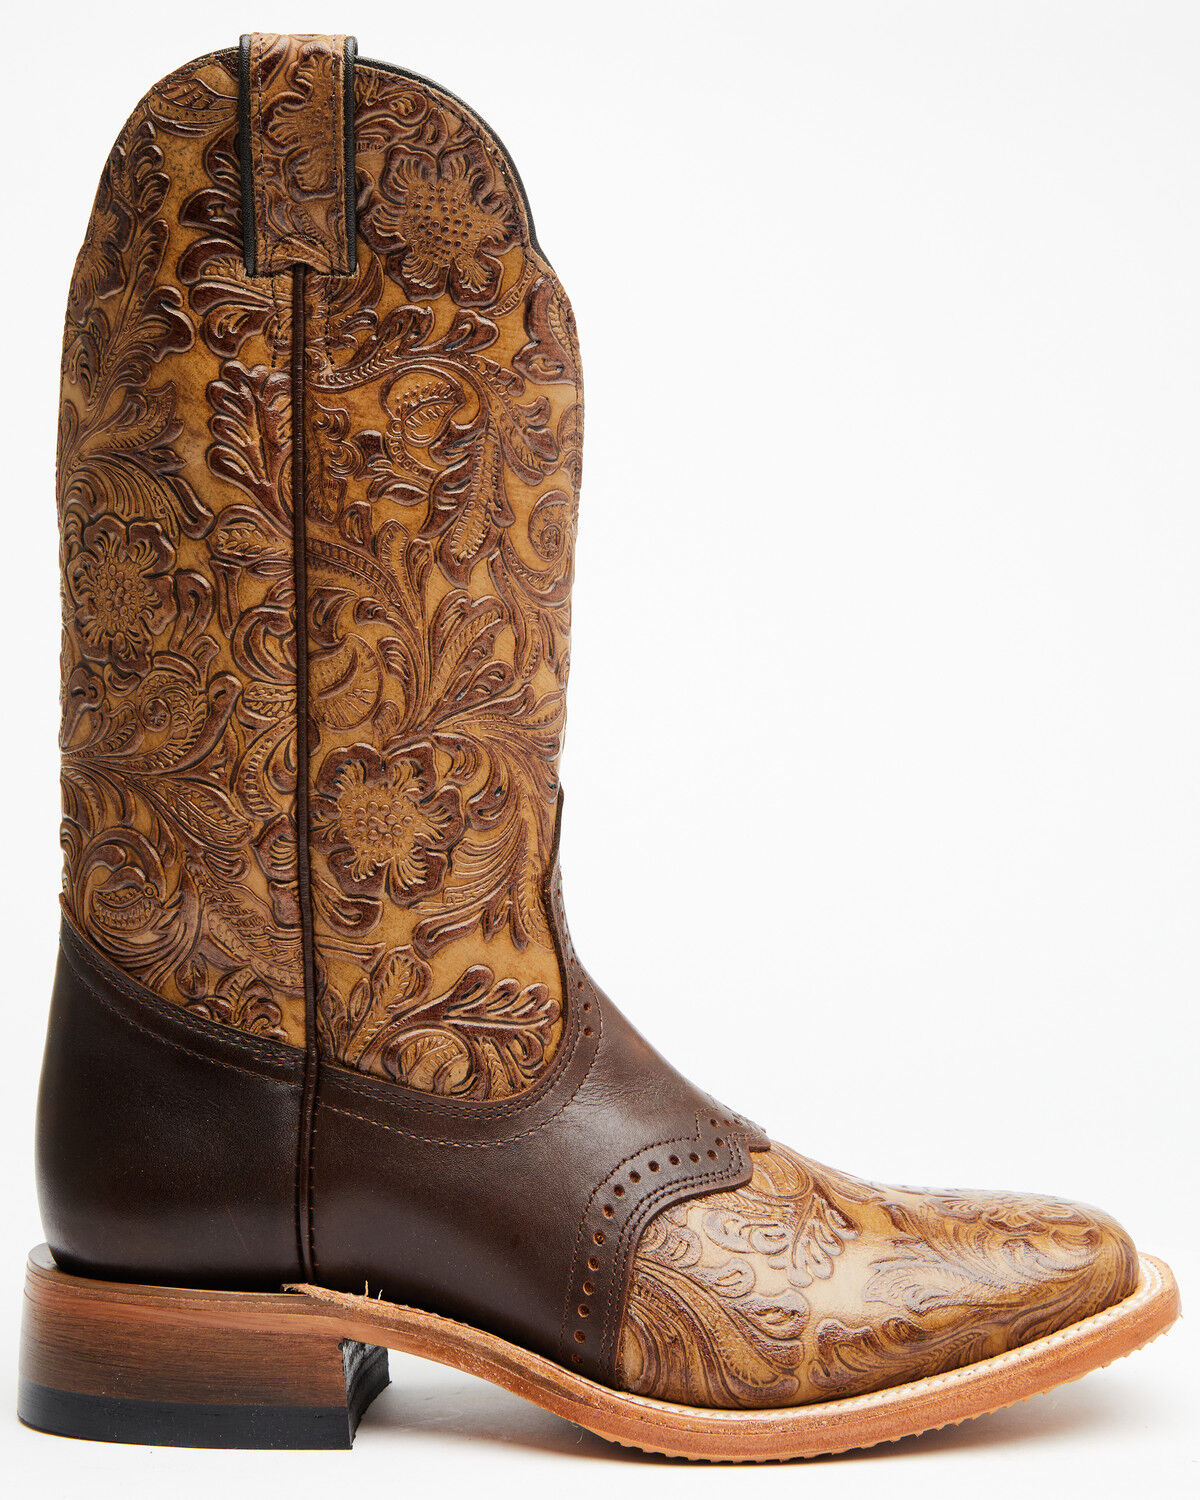 Cowboy boots hand tooled made to order to your size brown or black metallic toe. 